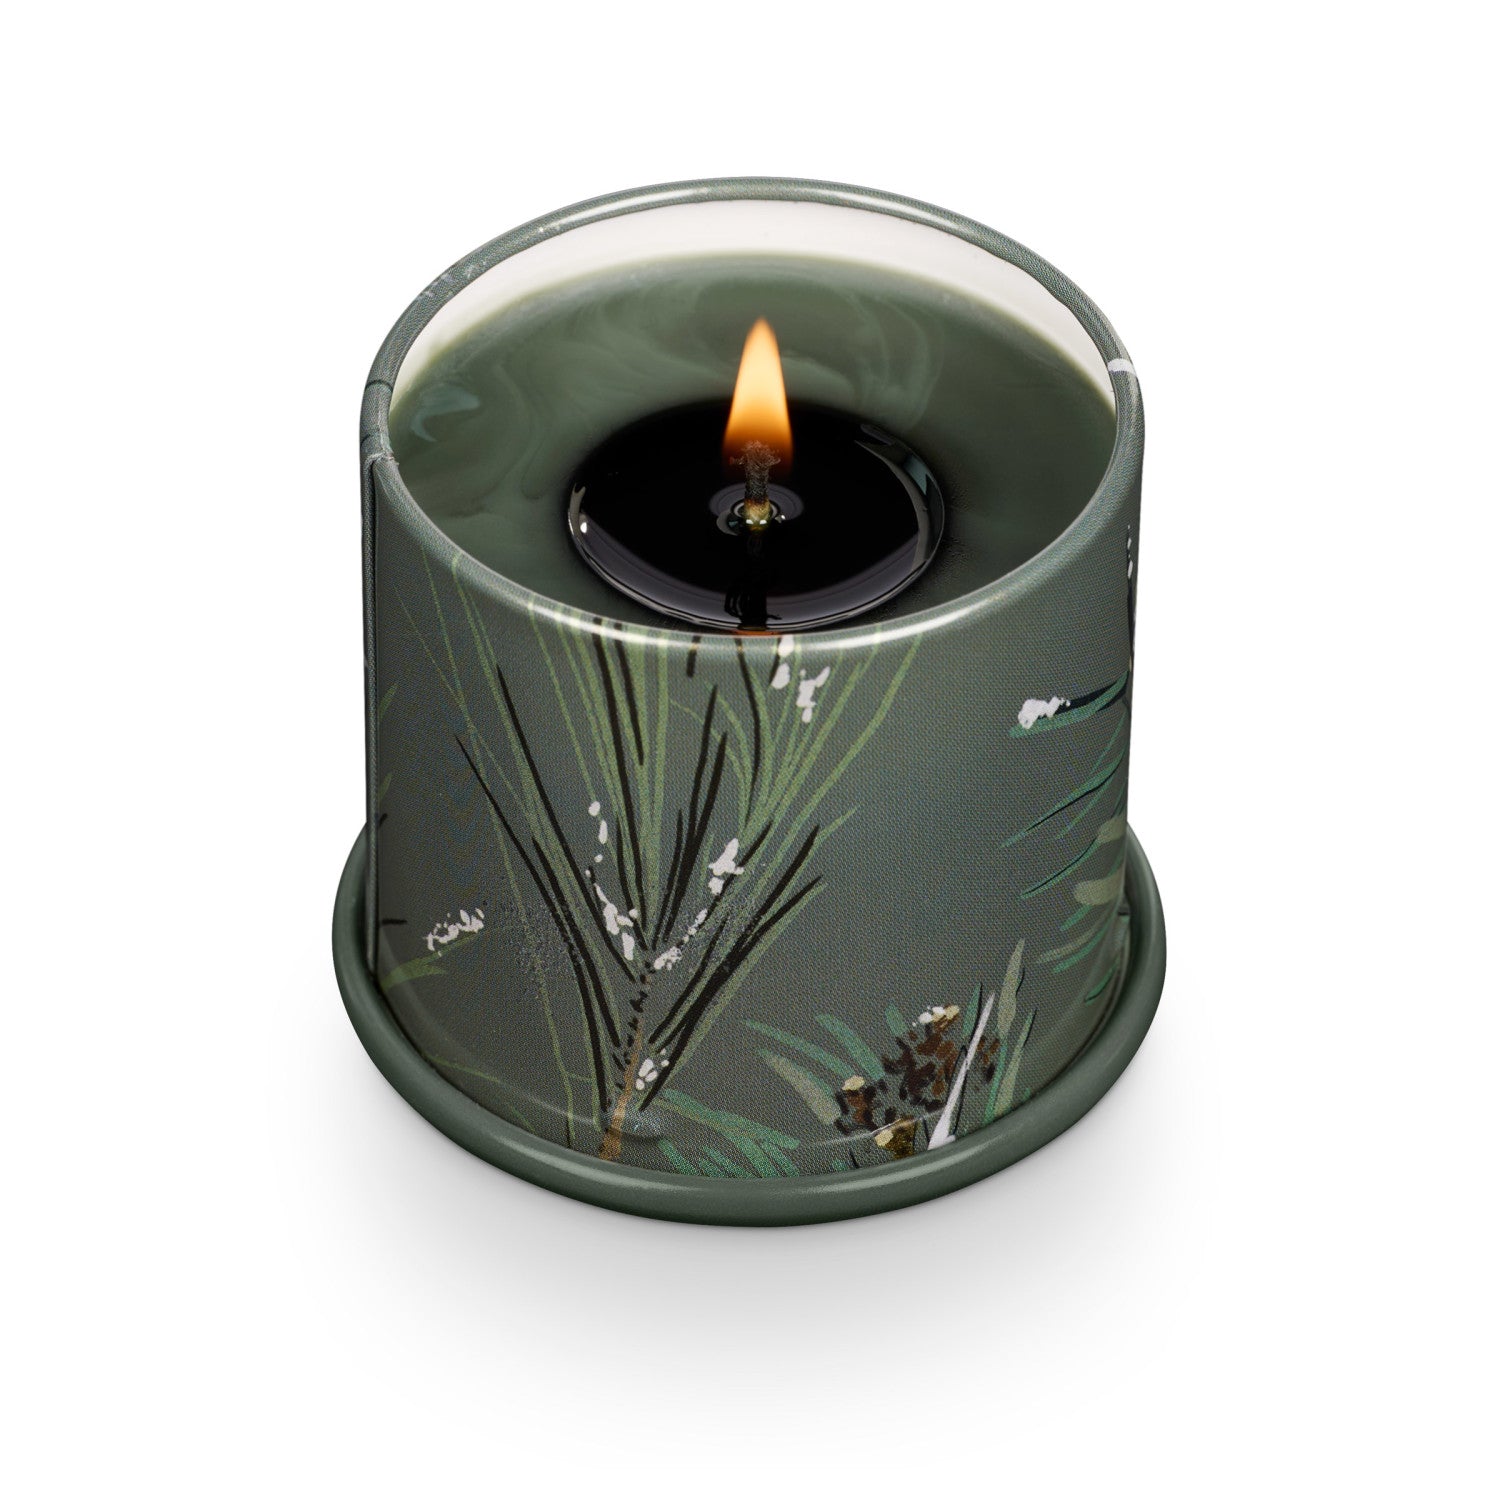 The North Sky Vanity Tin Candle